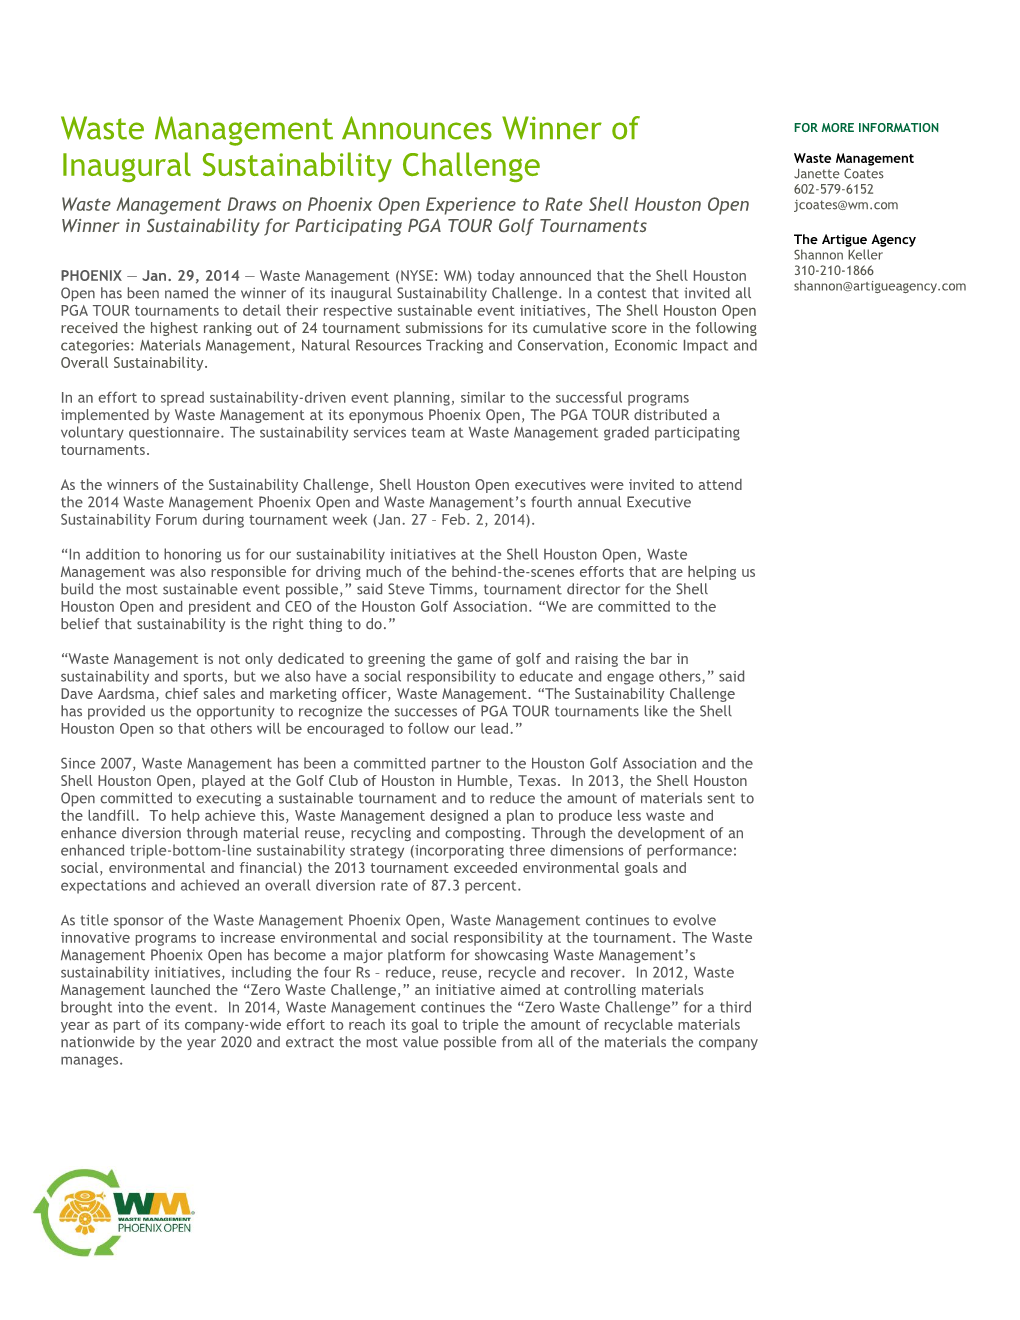 WASTE MANAGEMENT ANNOUNCES WINNER of INAUGURAL SUSTAINABILITY CHALLENGE Page 2 of 2